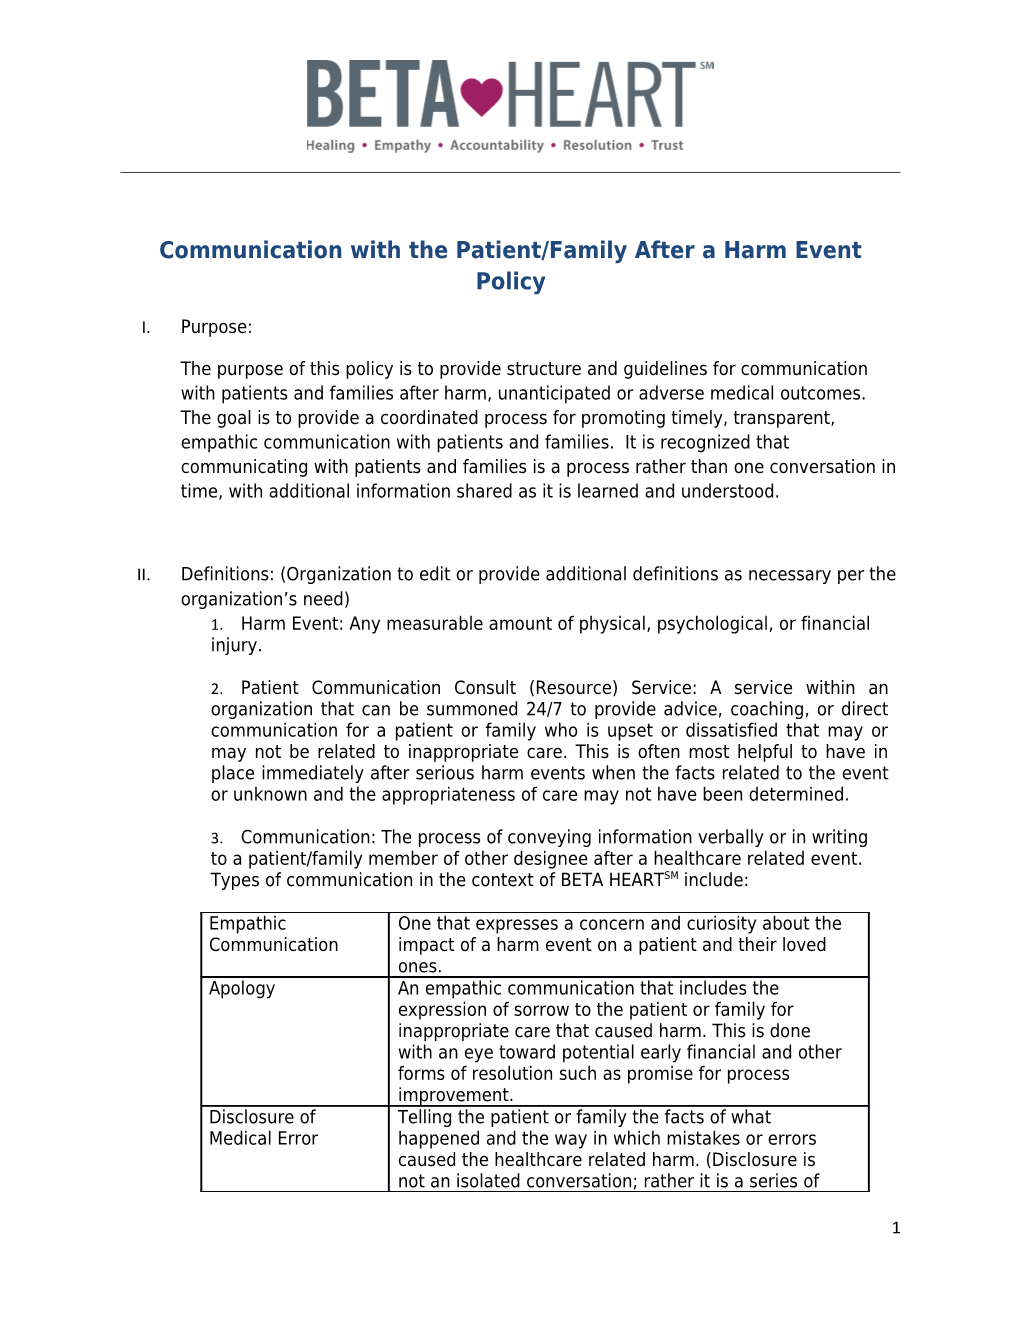 Communication with the Patient/Family After a Harm Event Policy